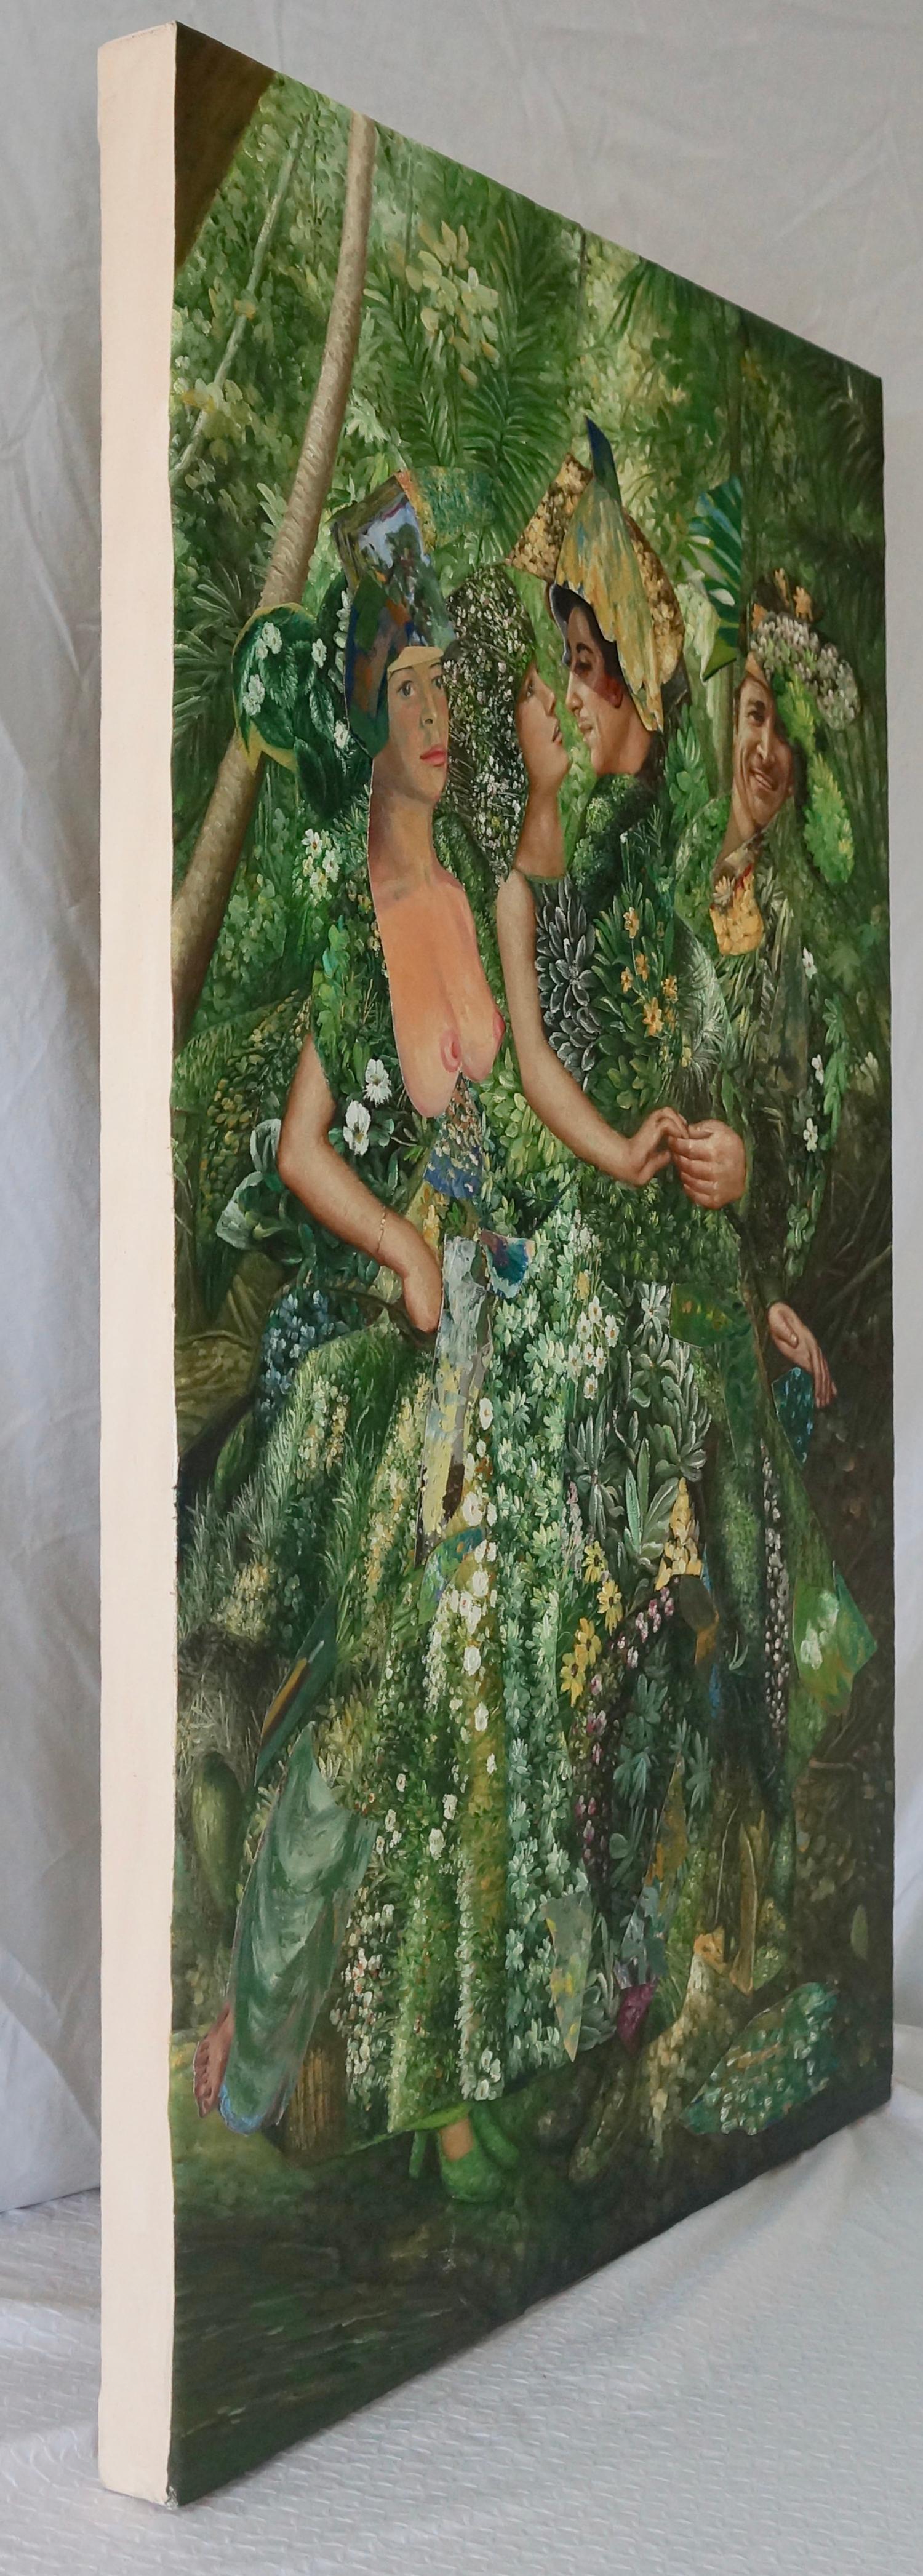 John Baker’s “Forest Embrace”, an acrylic painting on canvas with collage 38.5 x 26.5 inches in greens and whites with solar yellow highlights, is from the artist’s Sanctuary series. Tropical luxuriance is suggested by the great proliferation of